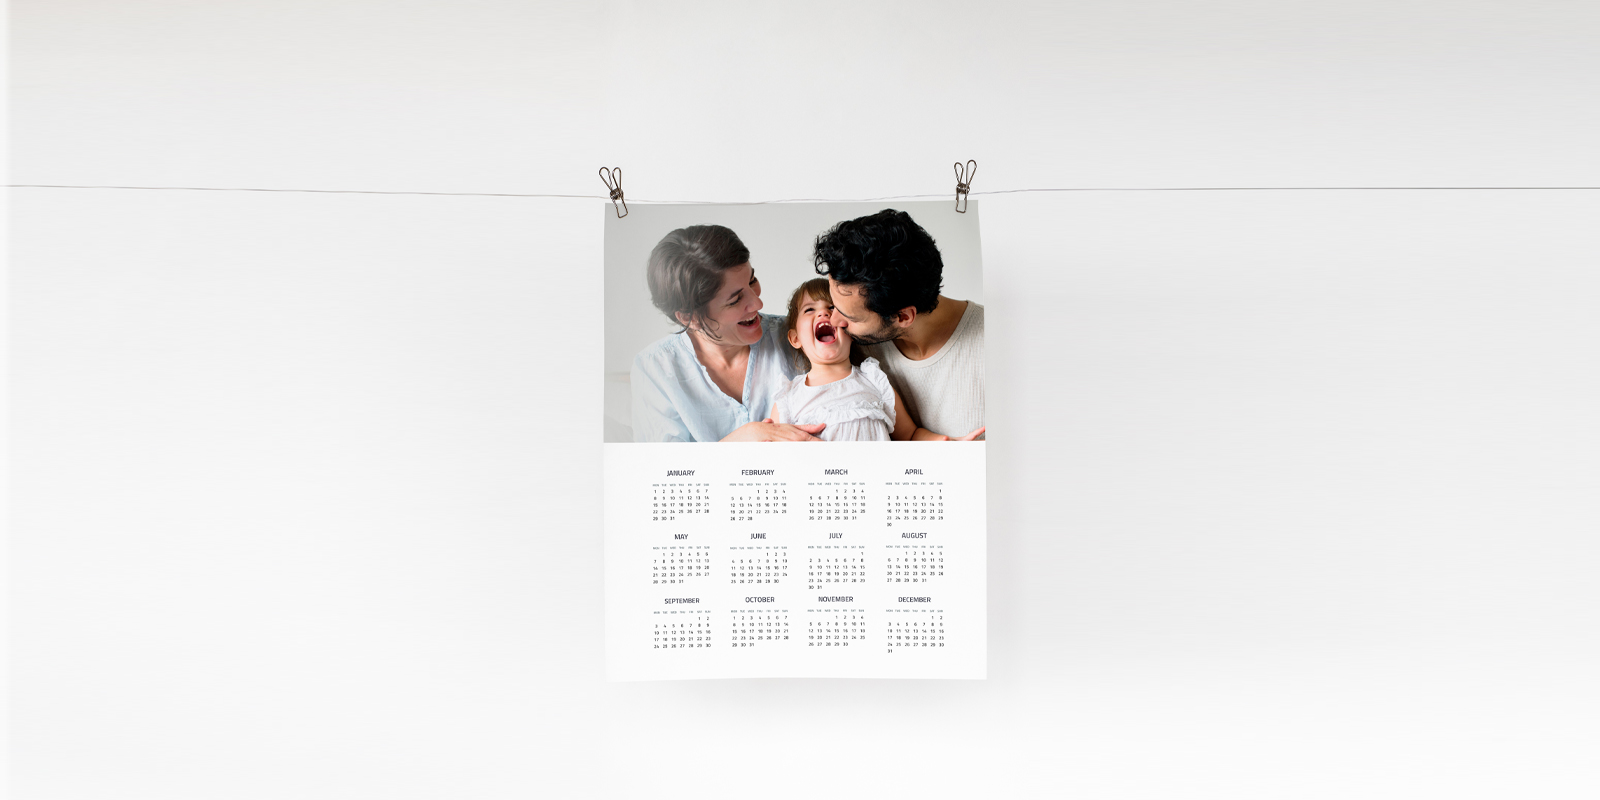 Photo calendars in Toowoomba - Print with Pagerr